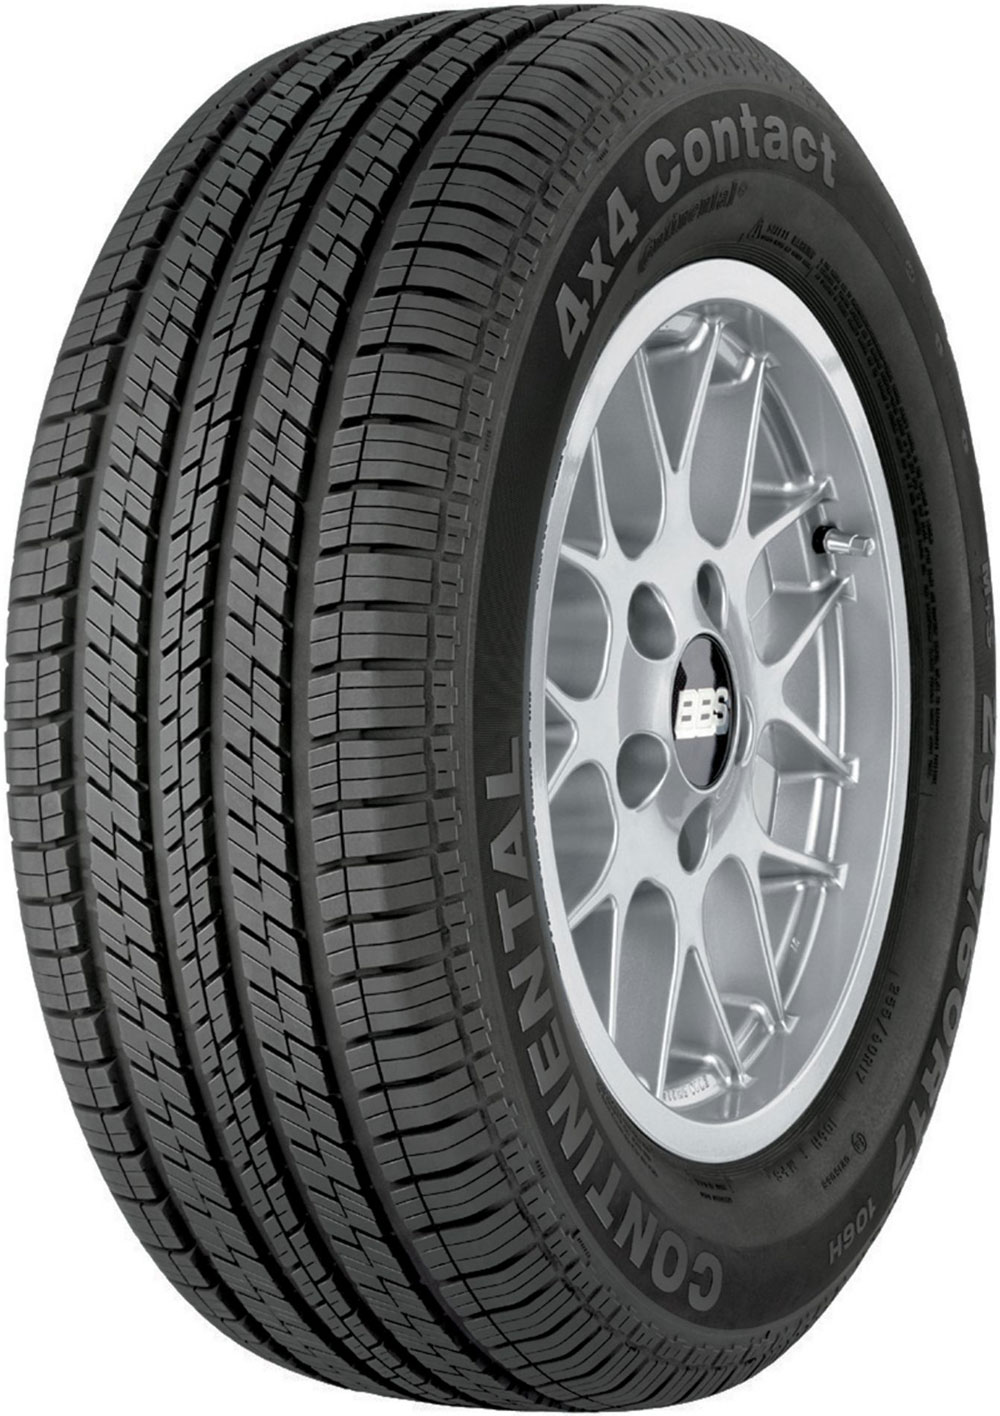 CONTINENTAL 4X4 CONTACT 195/80 R15 96H